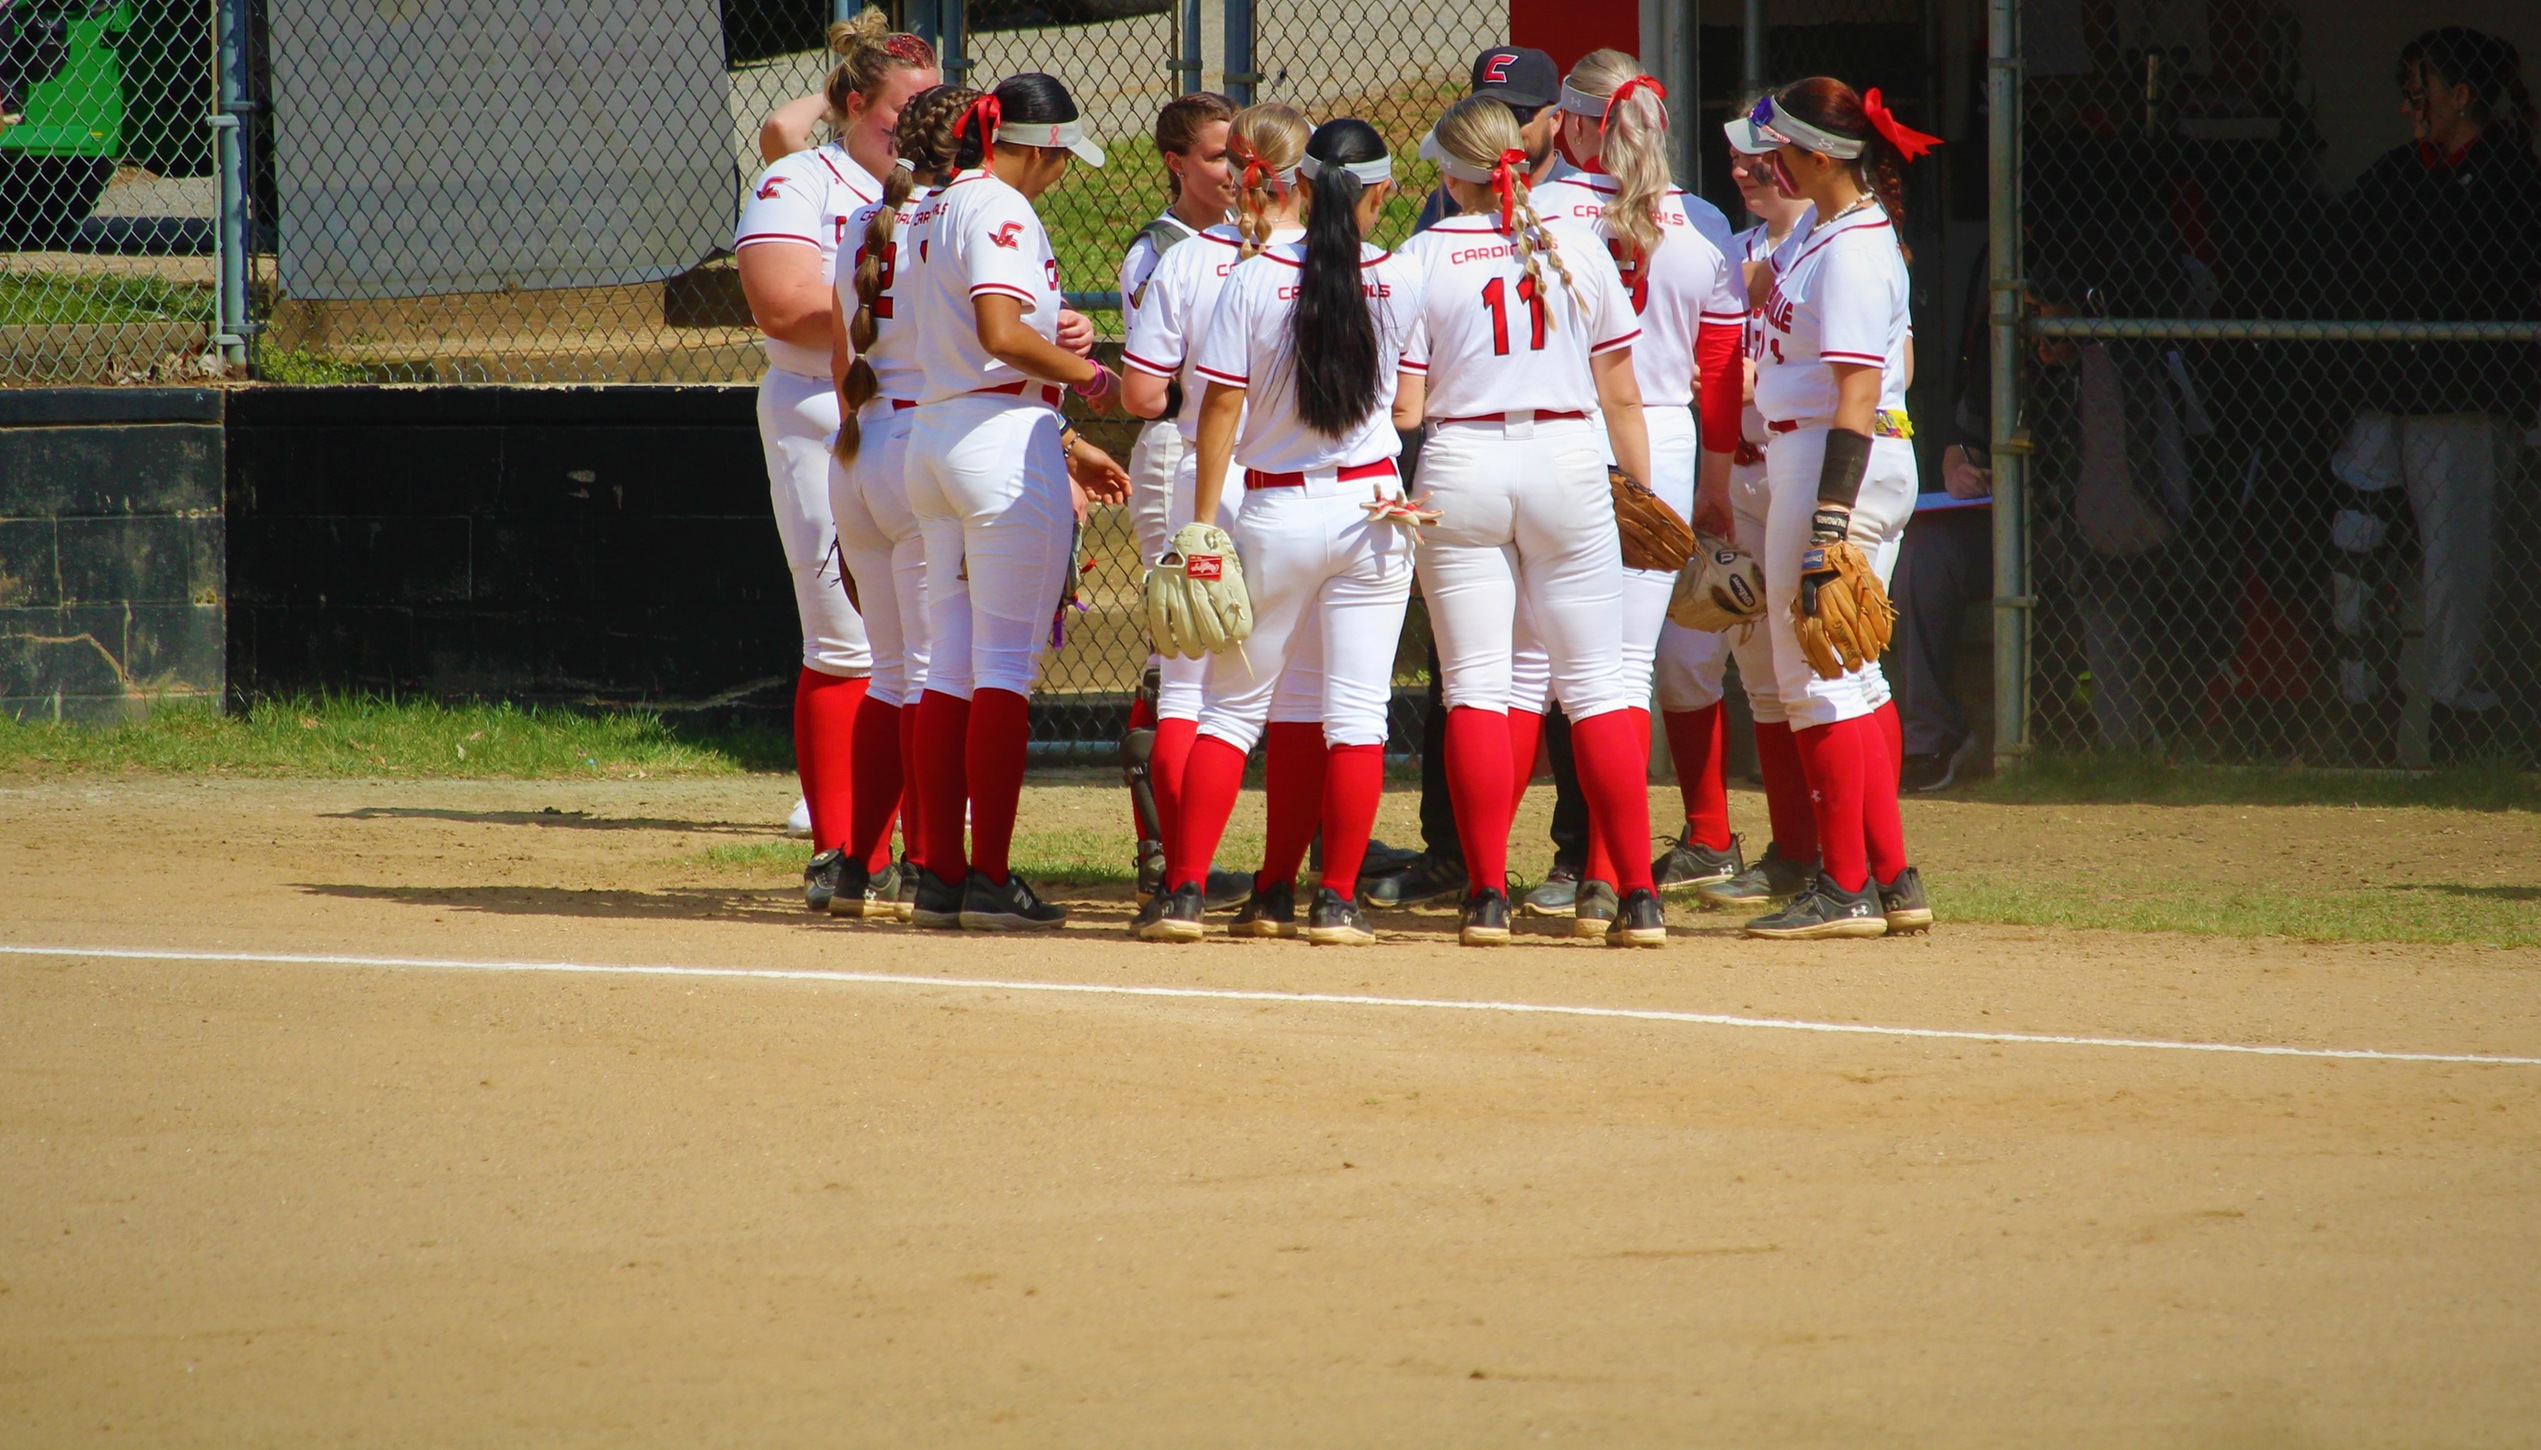 Cardinals Win Fourth Straight Via Mercy Rule